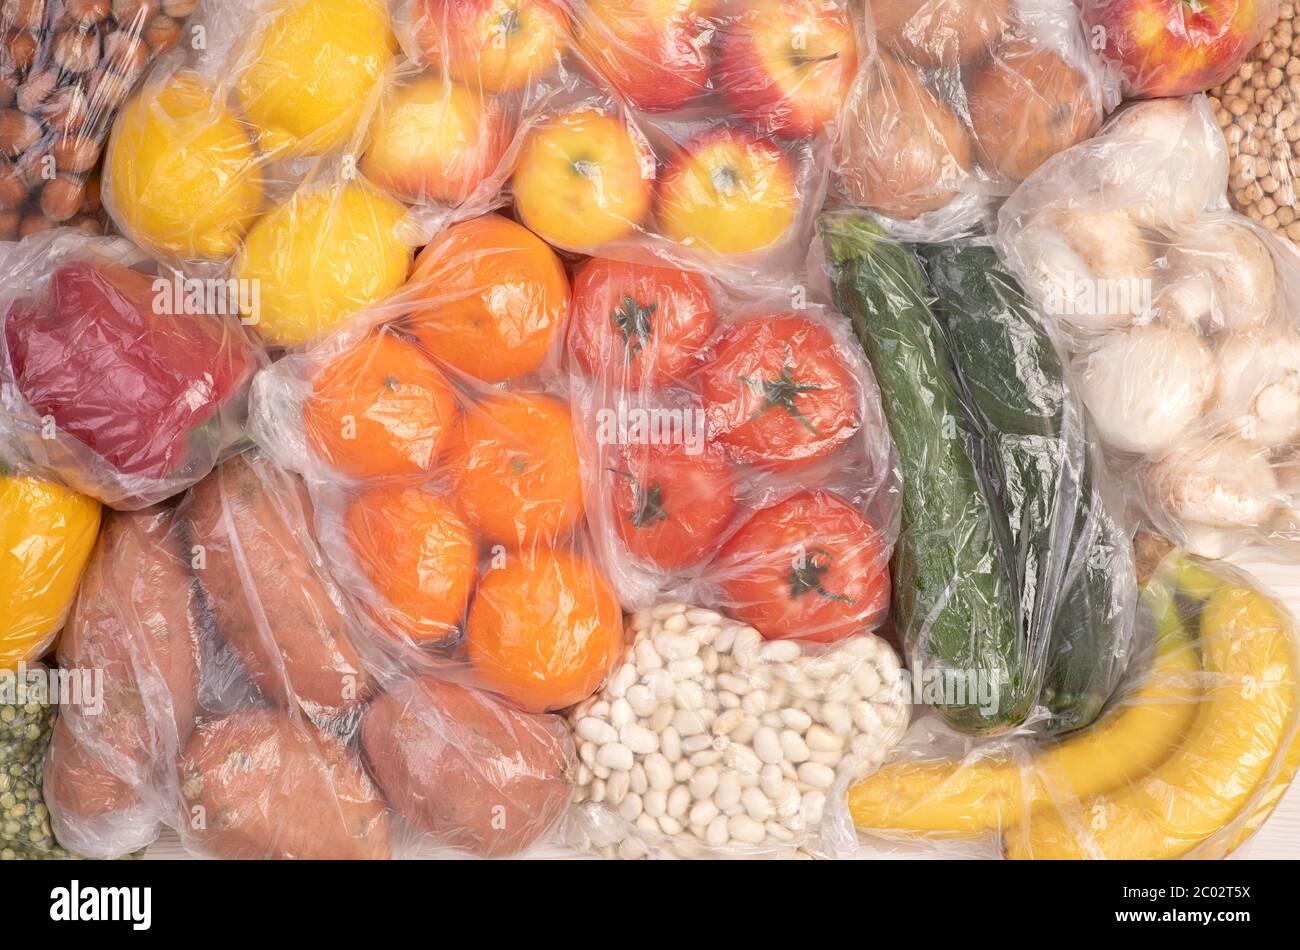 Plastic packaging. Fruits and vegetables in plastic bags Stock Photo